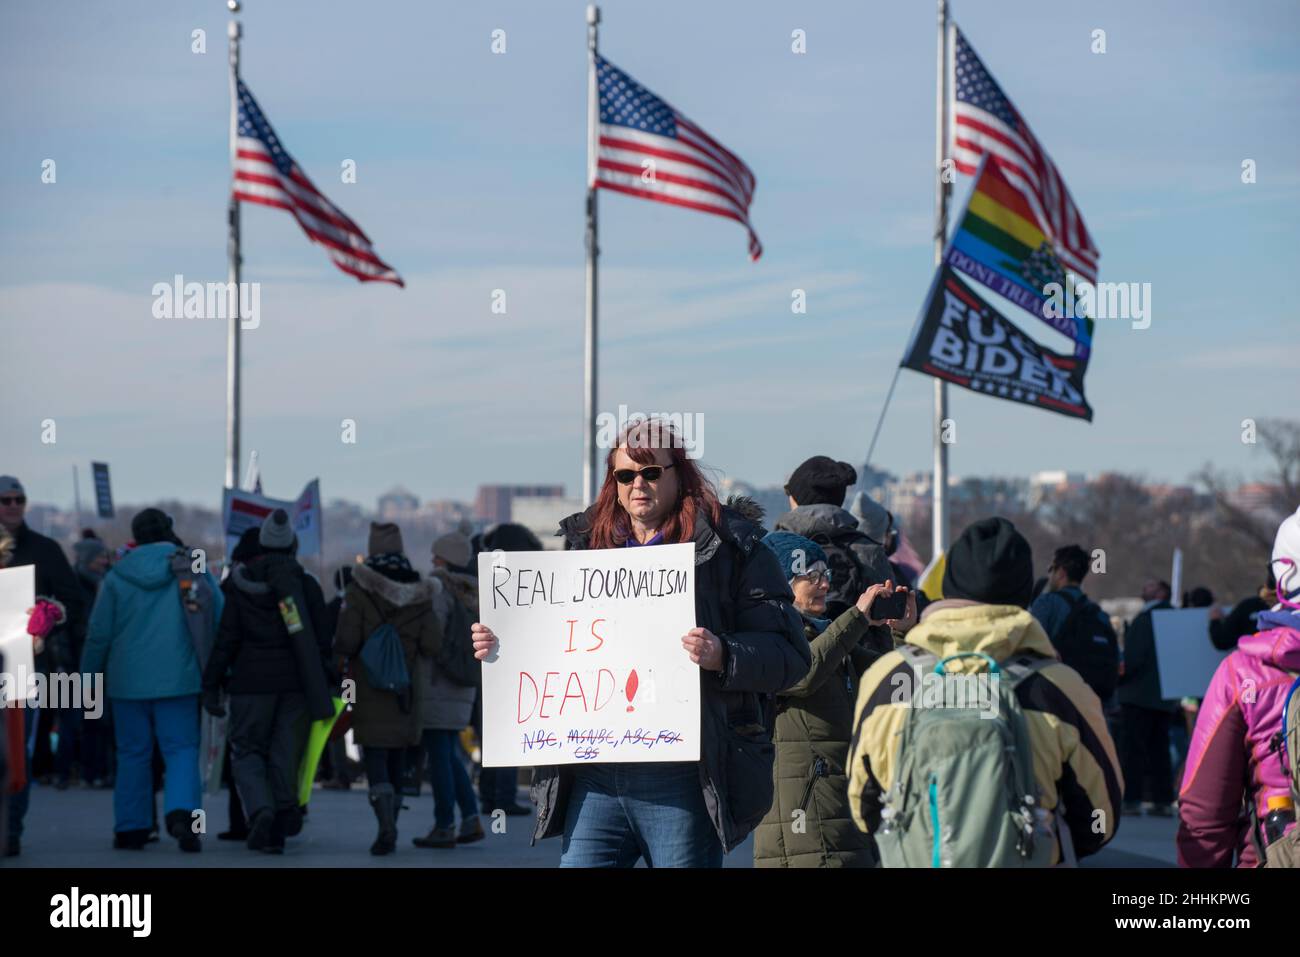 Demonstrators participate in Defeat the Mandates march in Washington, DC, on January 23, 2022, protesting mask and COVID-19 vaccination mandates. US. Stock Photo